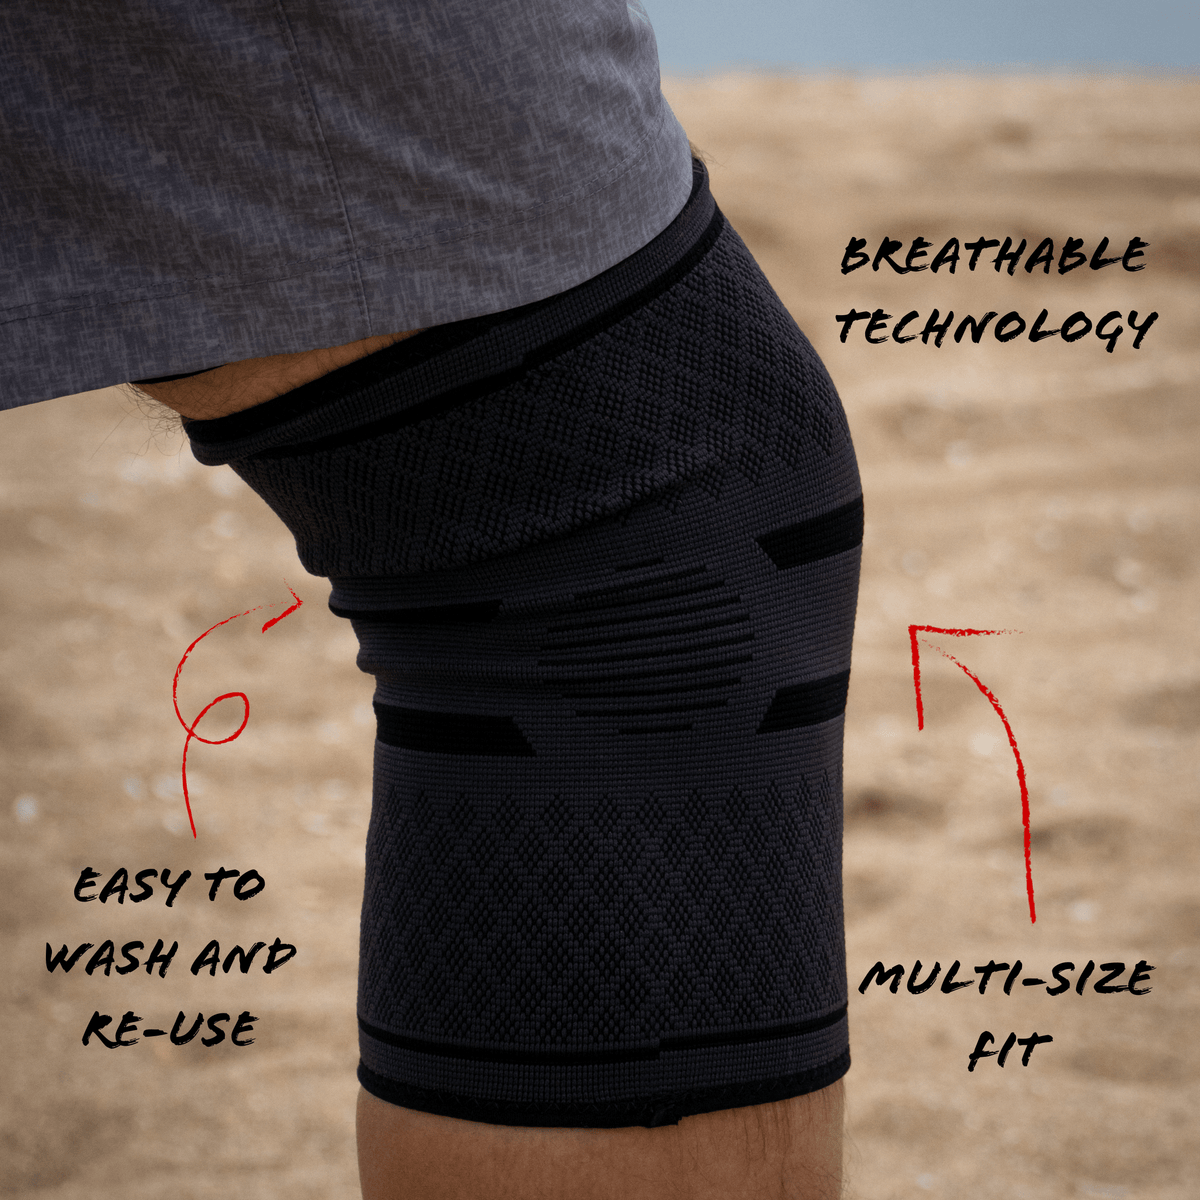 Spartan sports and fitness compression knee sleeve has breathable technology, is easy to wash and fits multiple sizes.